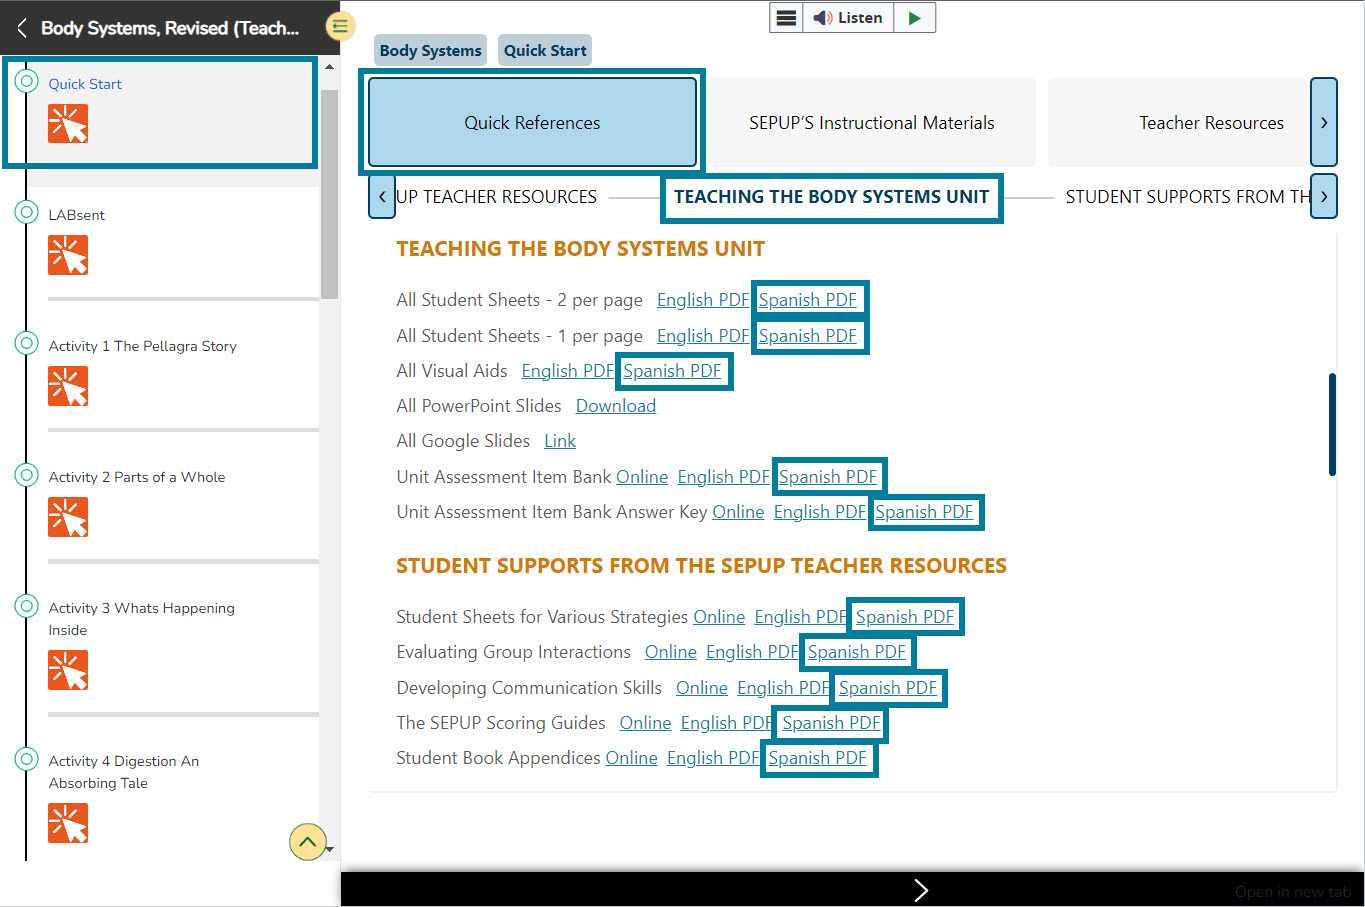 The “Teaching the Unit” section in the TE is shown. Links for English PDFs and Spanish PDFs are shown next to student sheets, visual aids, item banks, and student supports. Spanish links here are outlined in teal for emphasis.